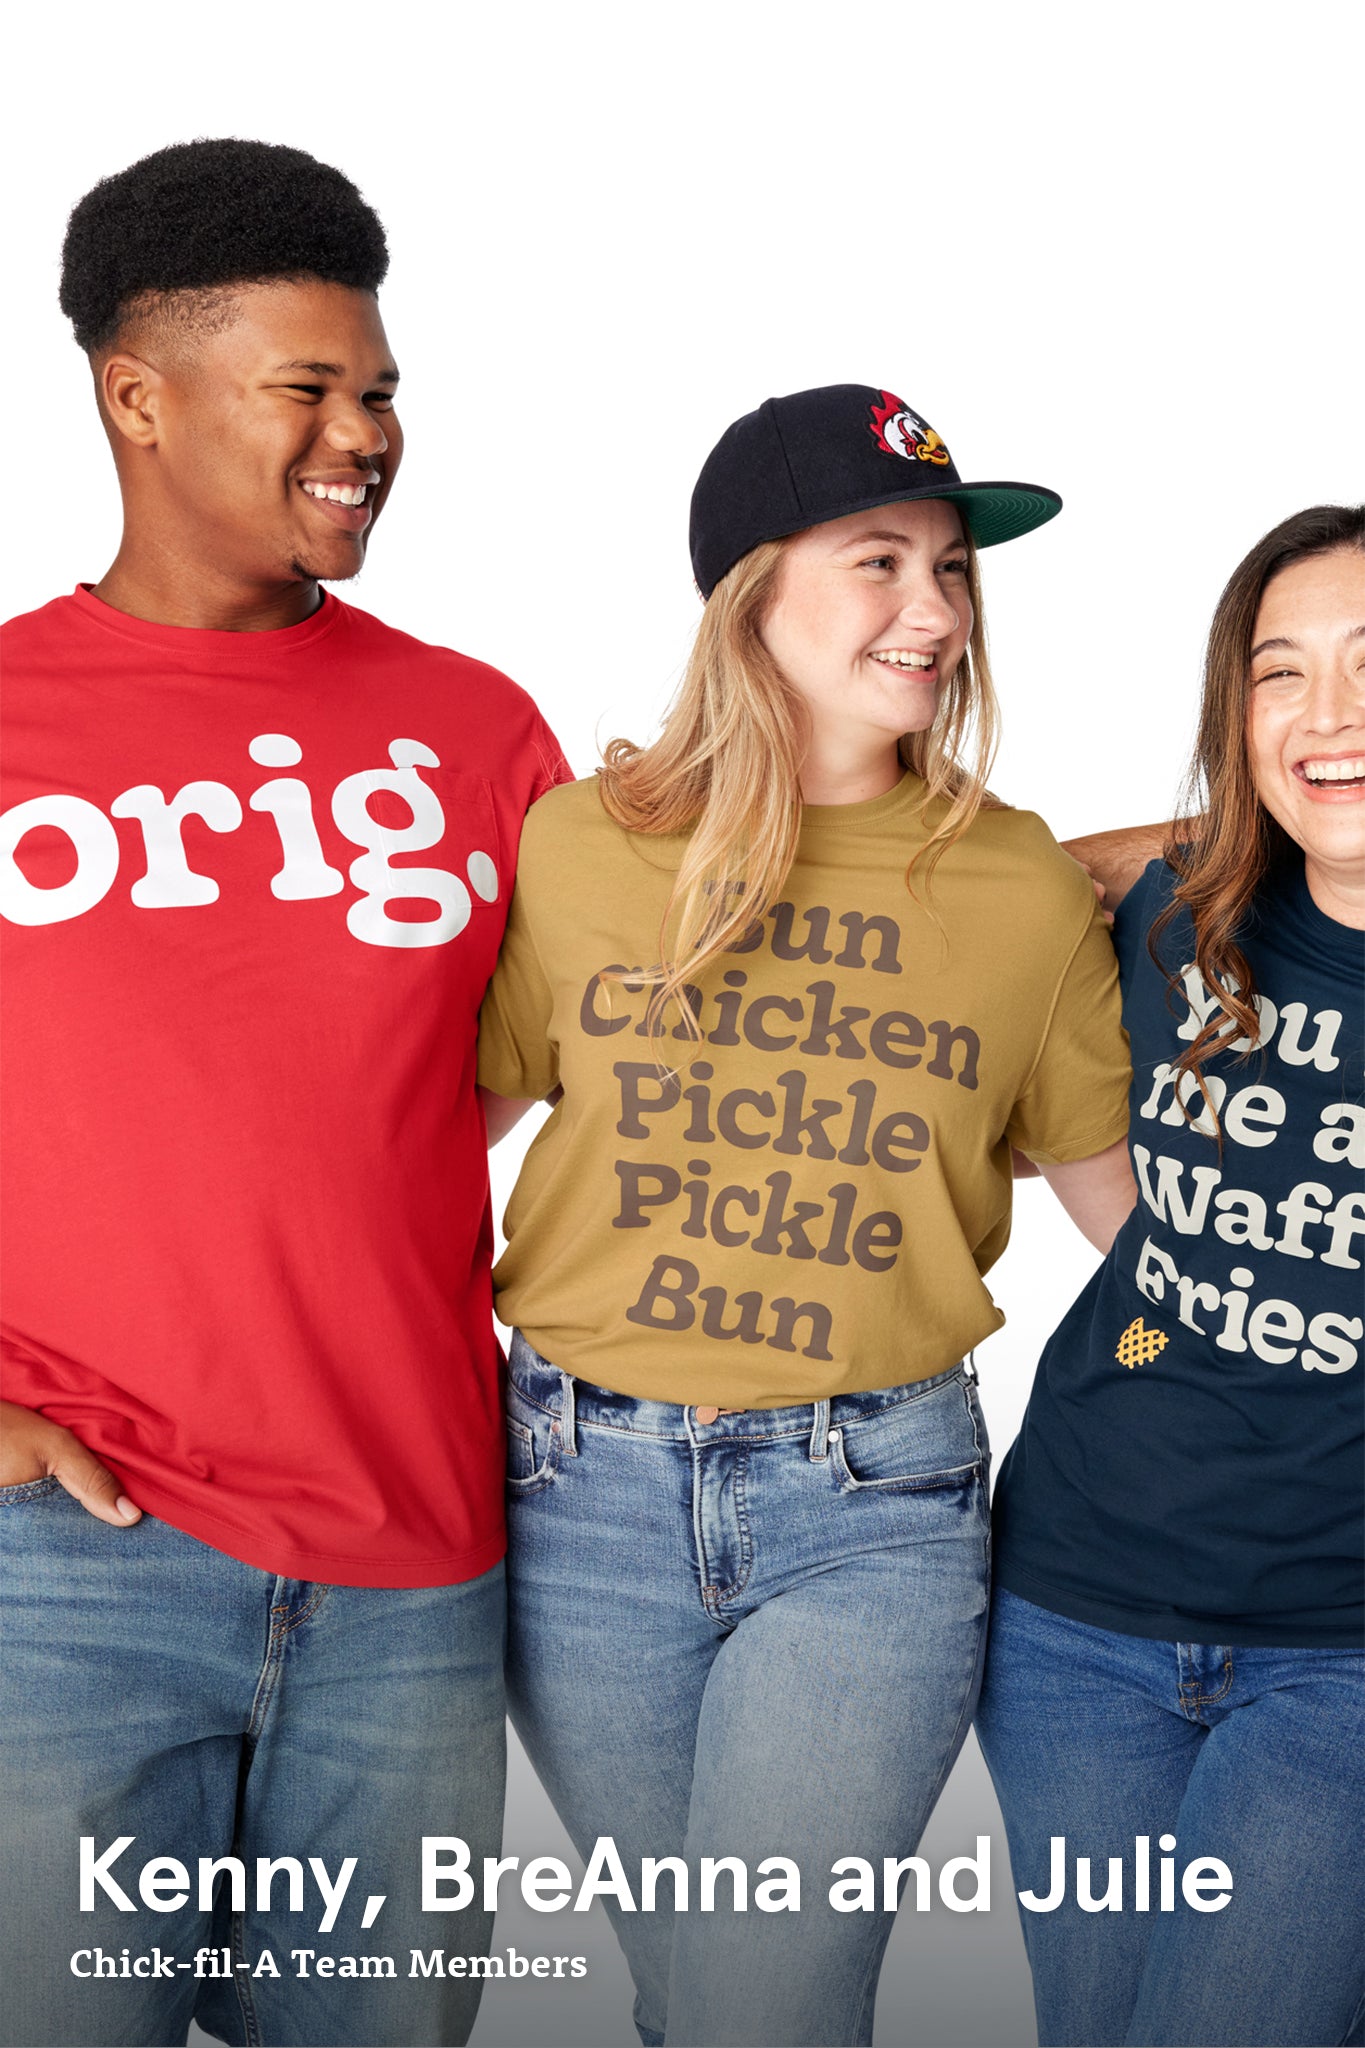 Man wearing Orig. Garment Dyed Pocket Tee, woman wearing Bun Chicken Pickle Pickle Bun Tee, and woman wearing Waffle Fry Cotton Jersey Tee with arms wrapped around each other